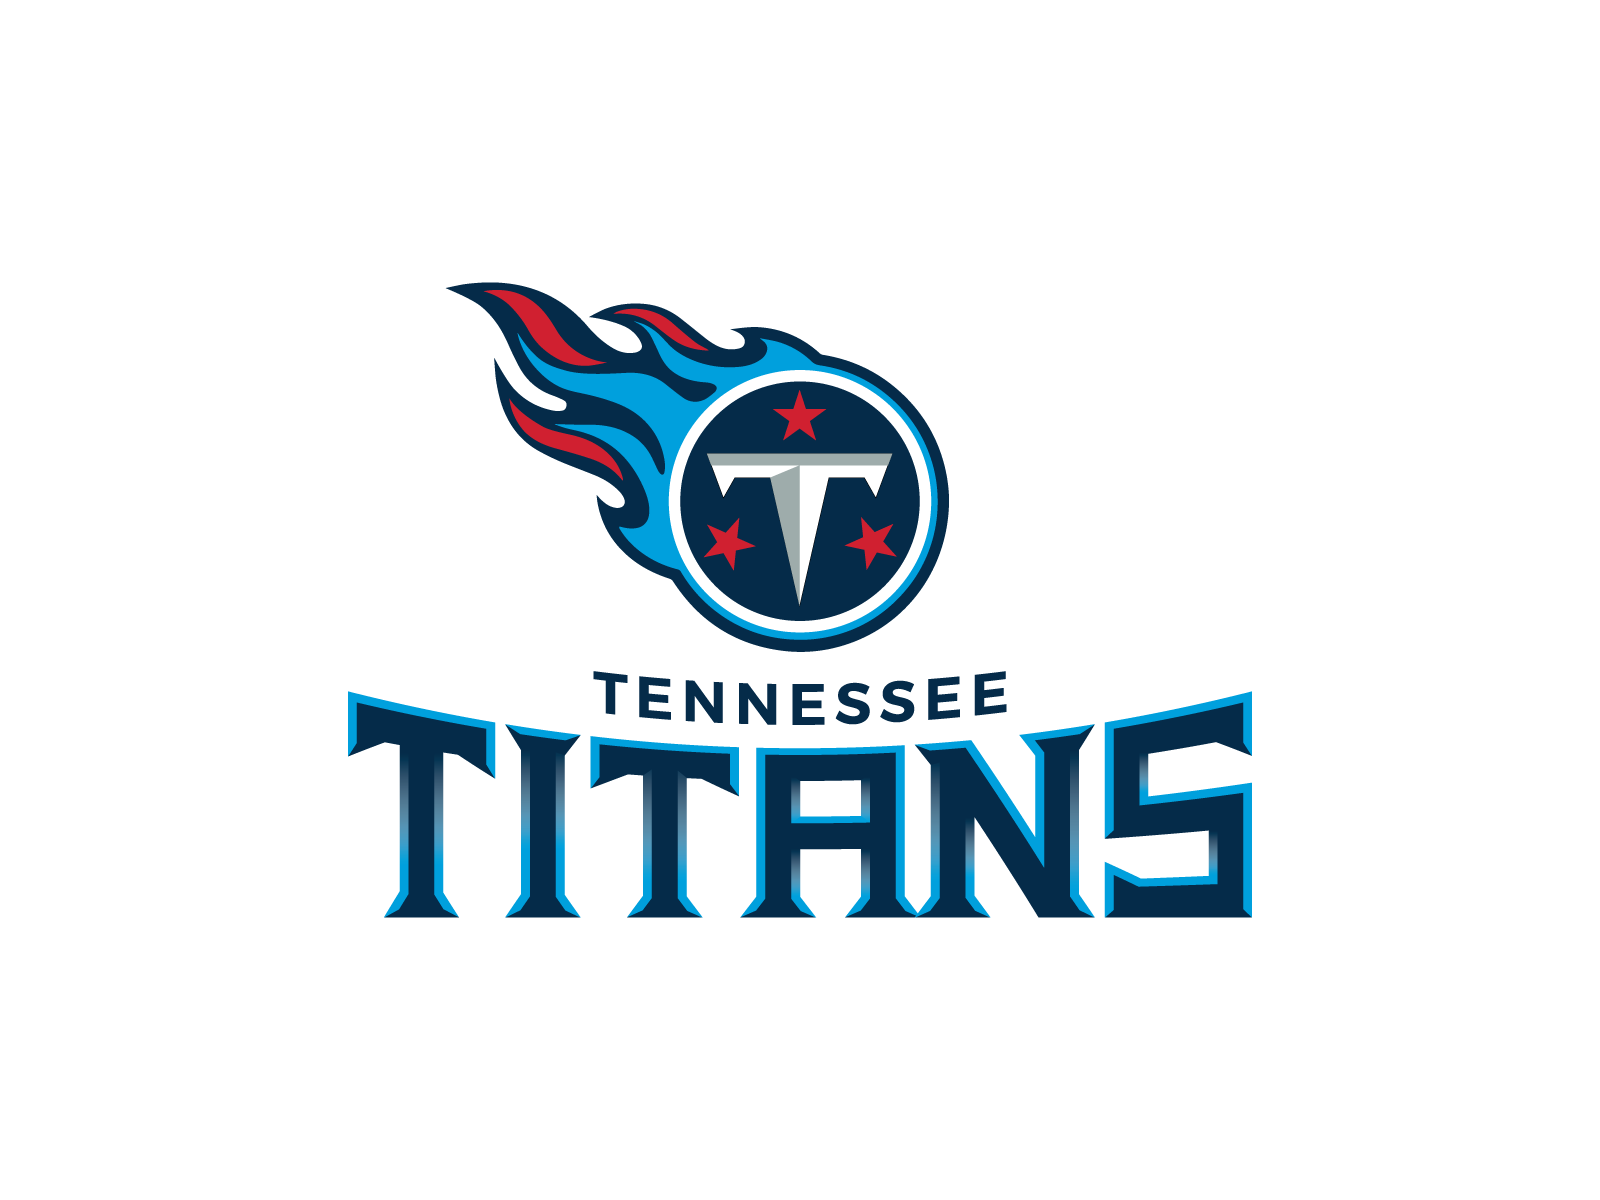 Tennessee titans wordmark by christopher wilson on